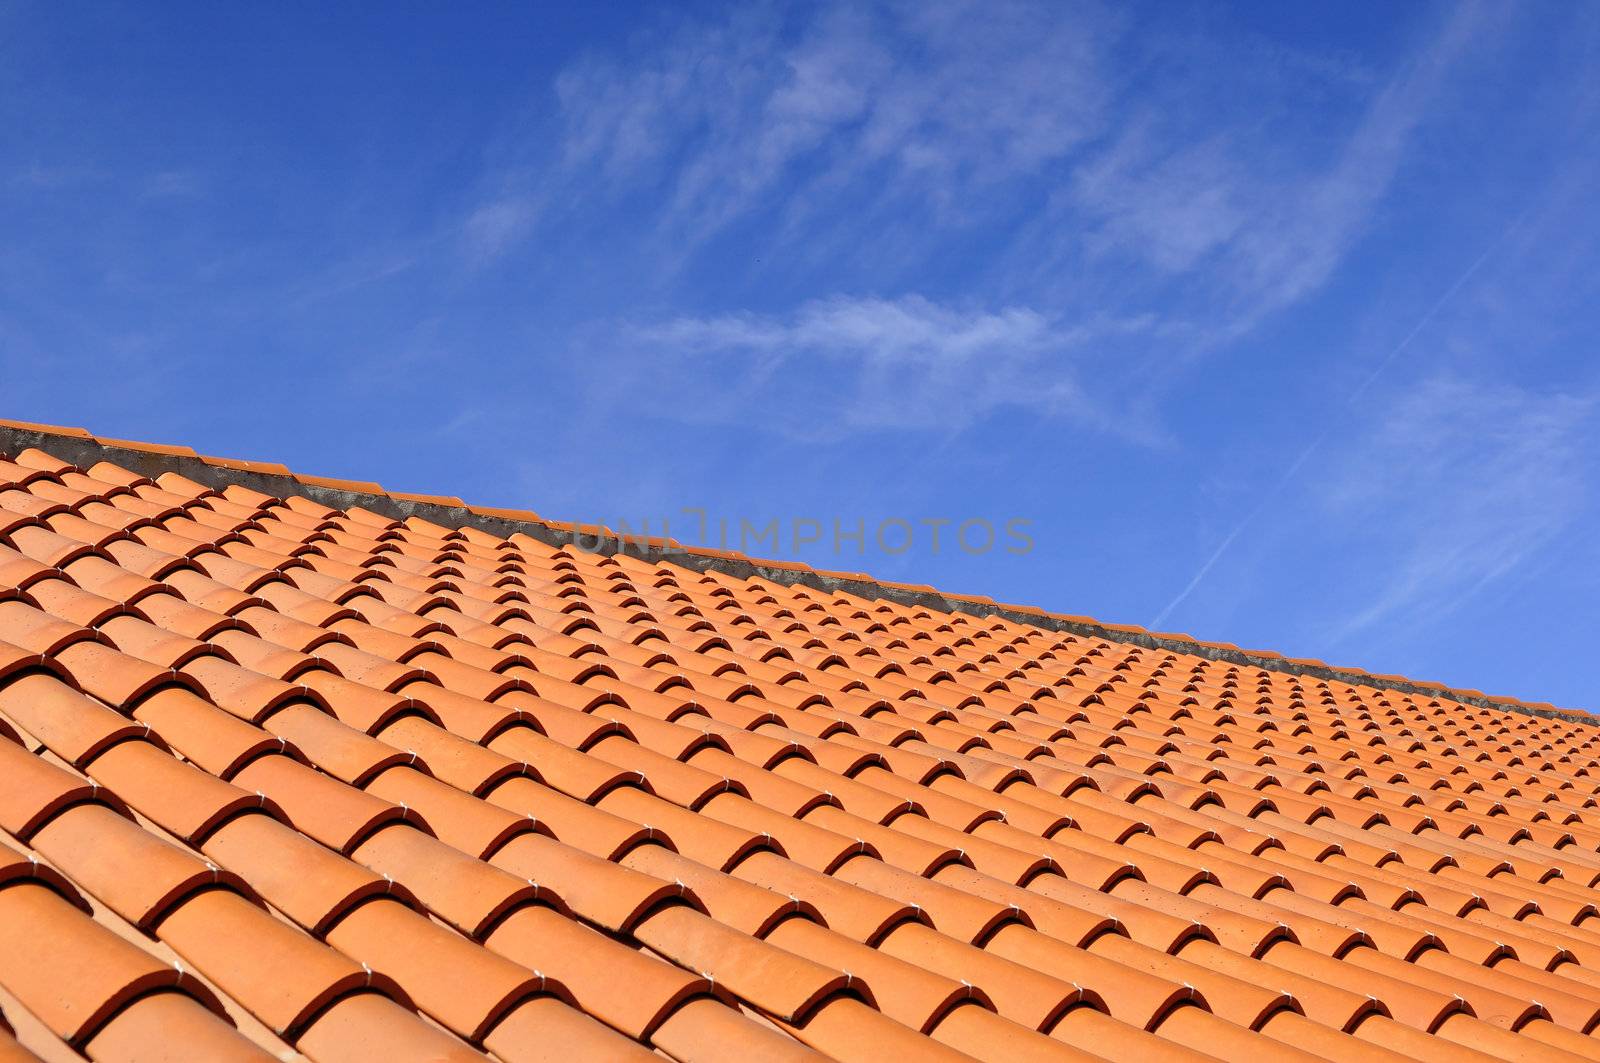 Orange roof tiles made from a ceramic material and the sky above